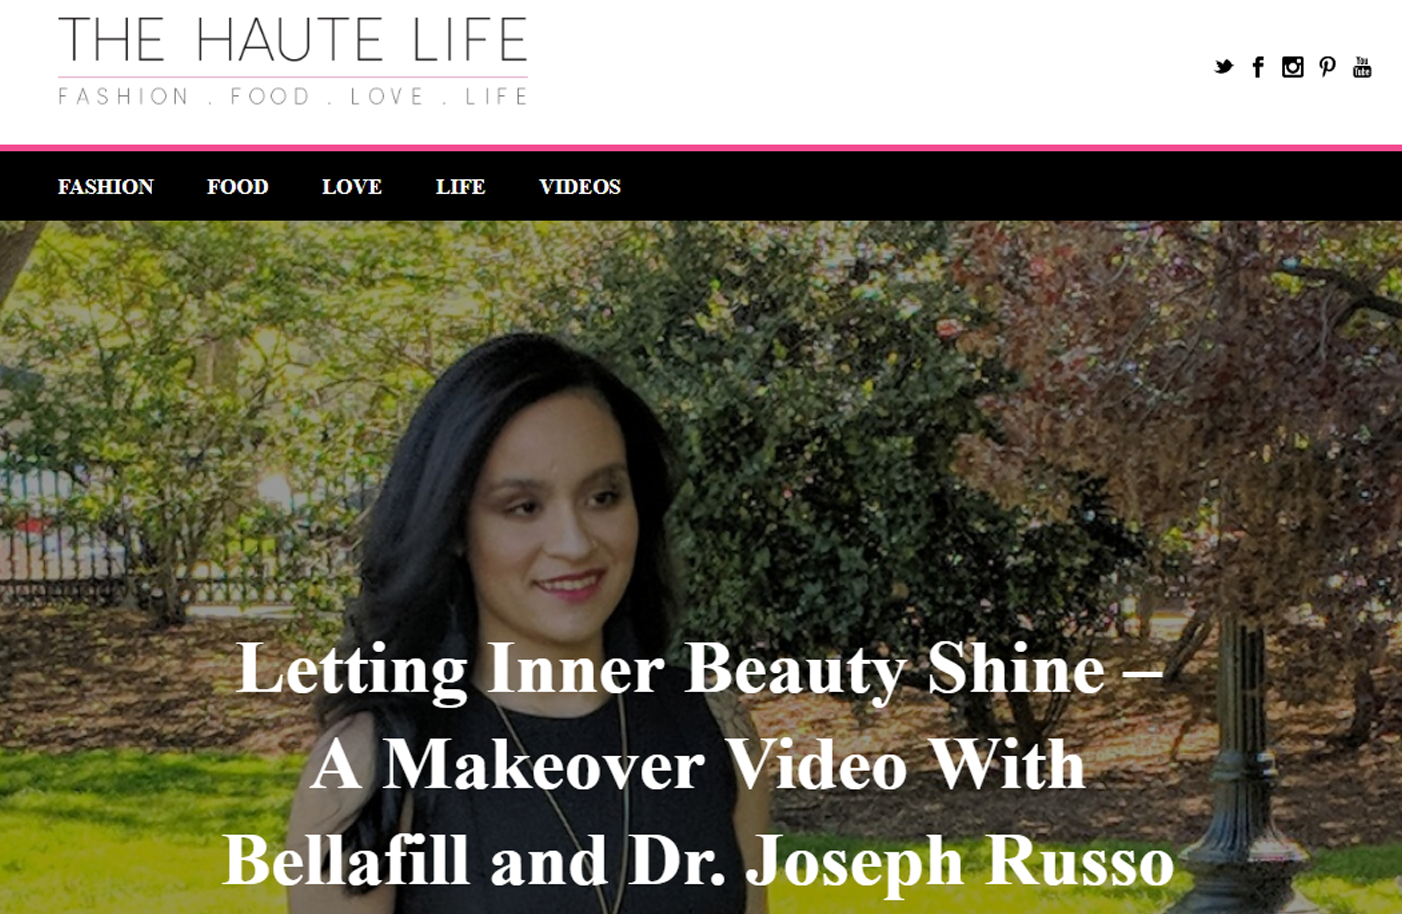 Letting Inner Beauty Shine – A Makeover Video With Bellafill and Dr. Joseph Russo